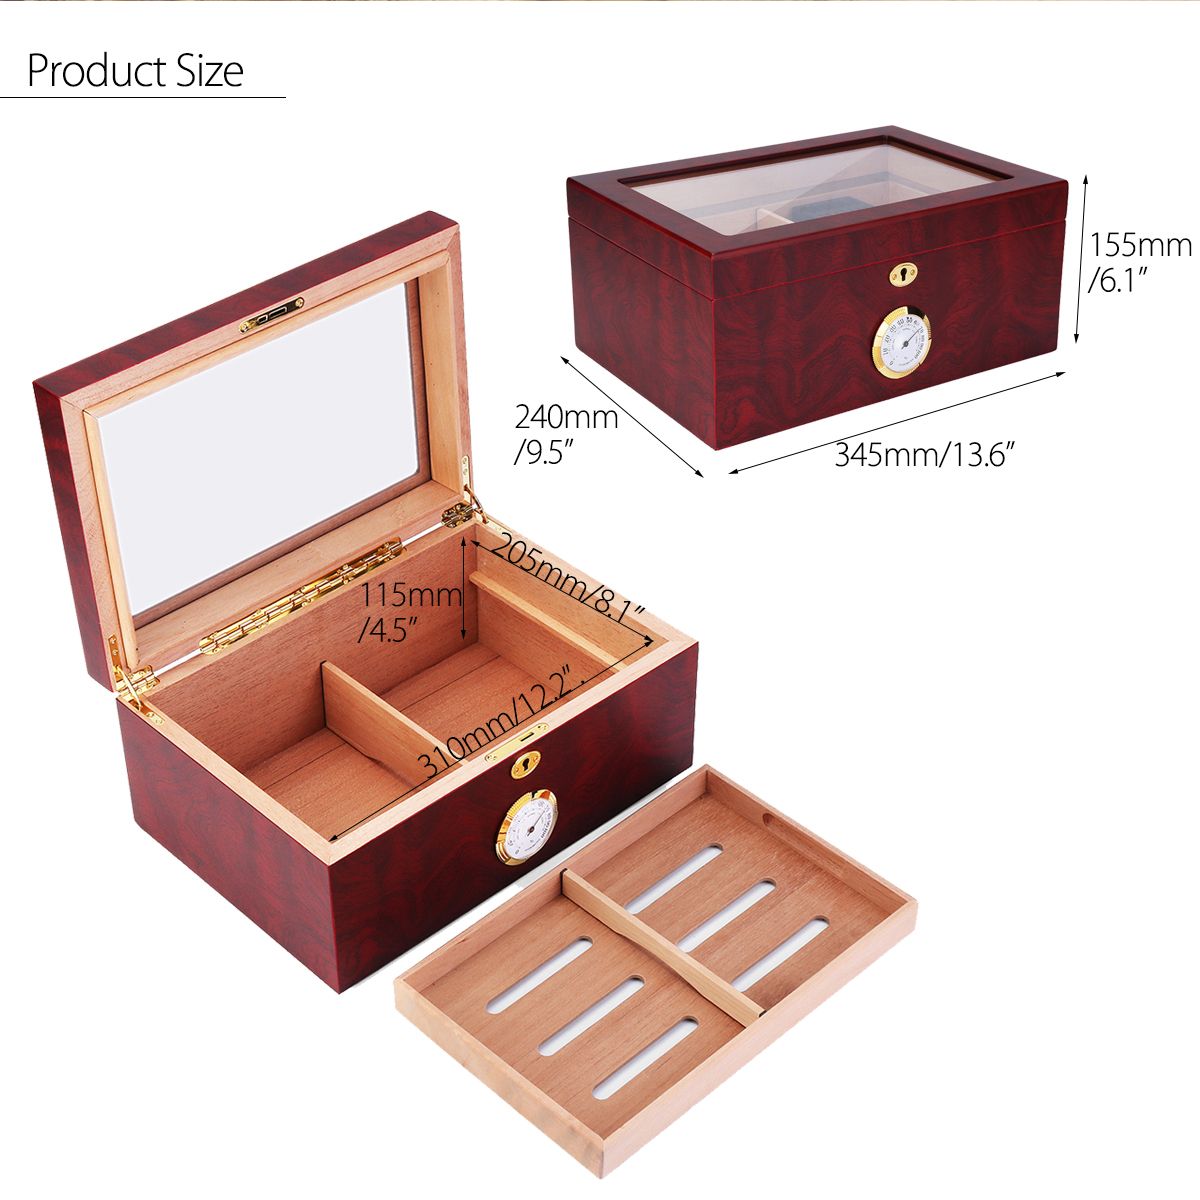 120-Pcs-Wooden-Grain-Humidifier-Storage-Box-Case-With-Lockstitch-Transparent-Display-Window-Double-L-1420573